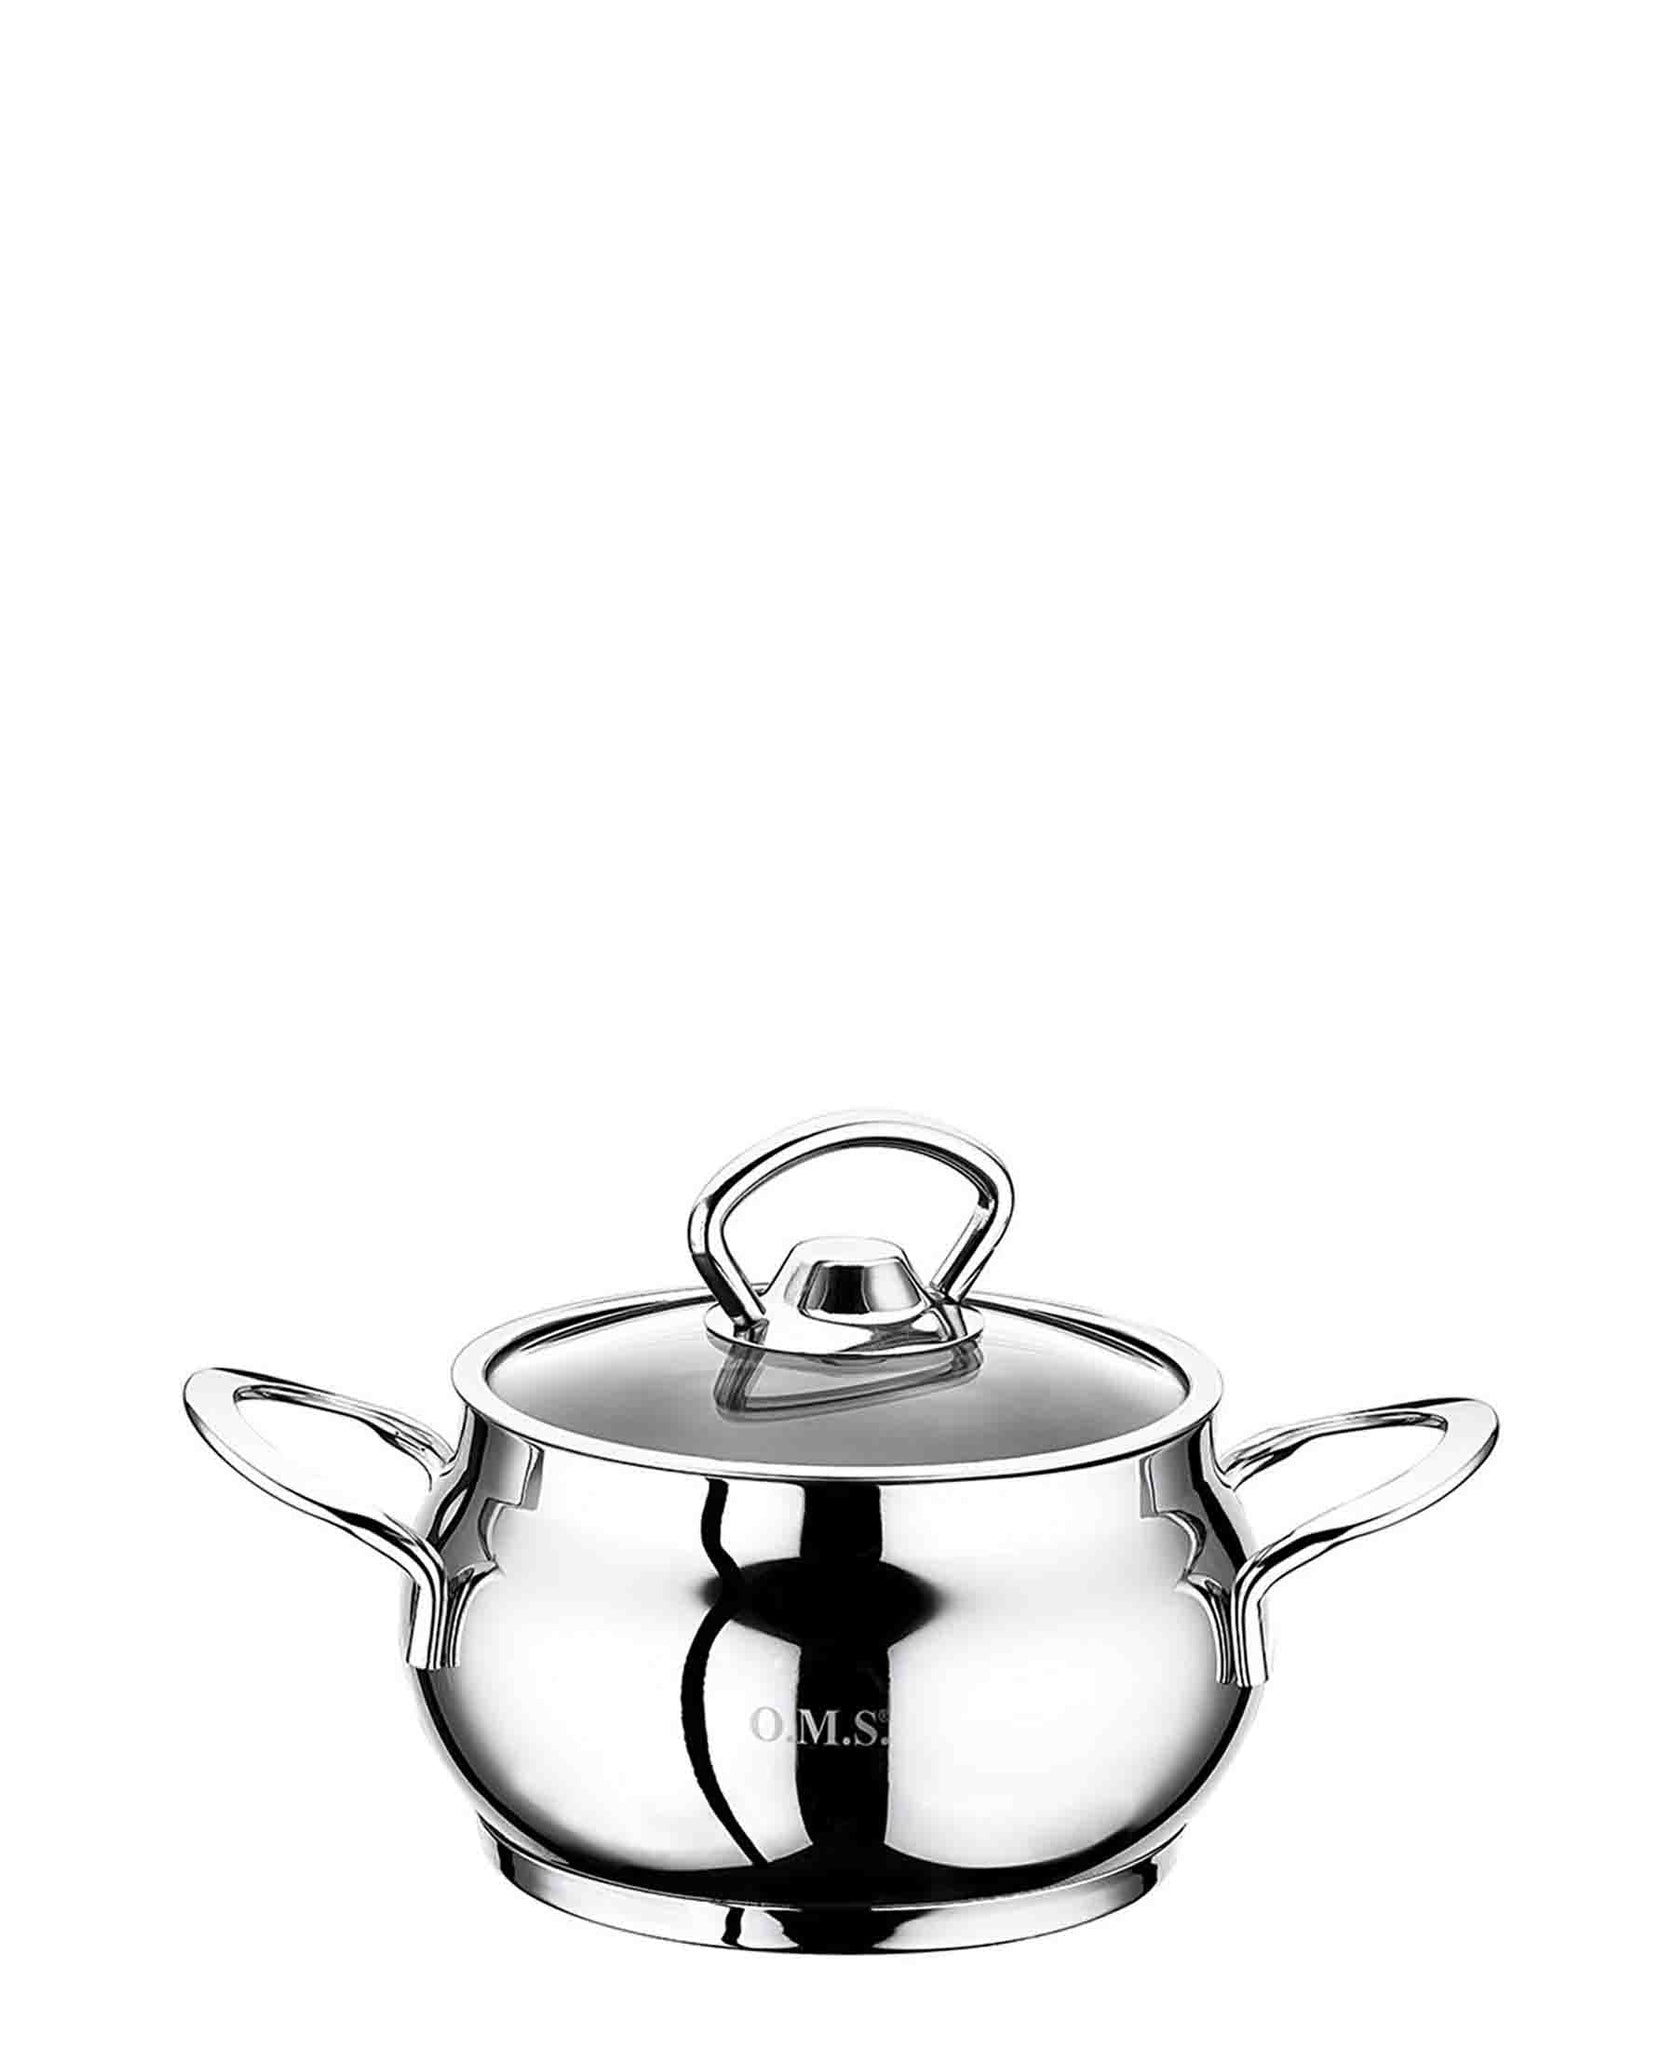 OMS Mini 12 x 6cm Stainless Steel Belly Shaped Casserole - Silver